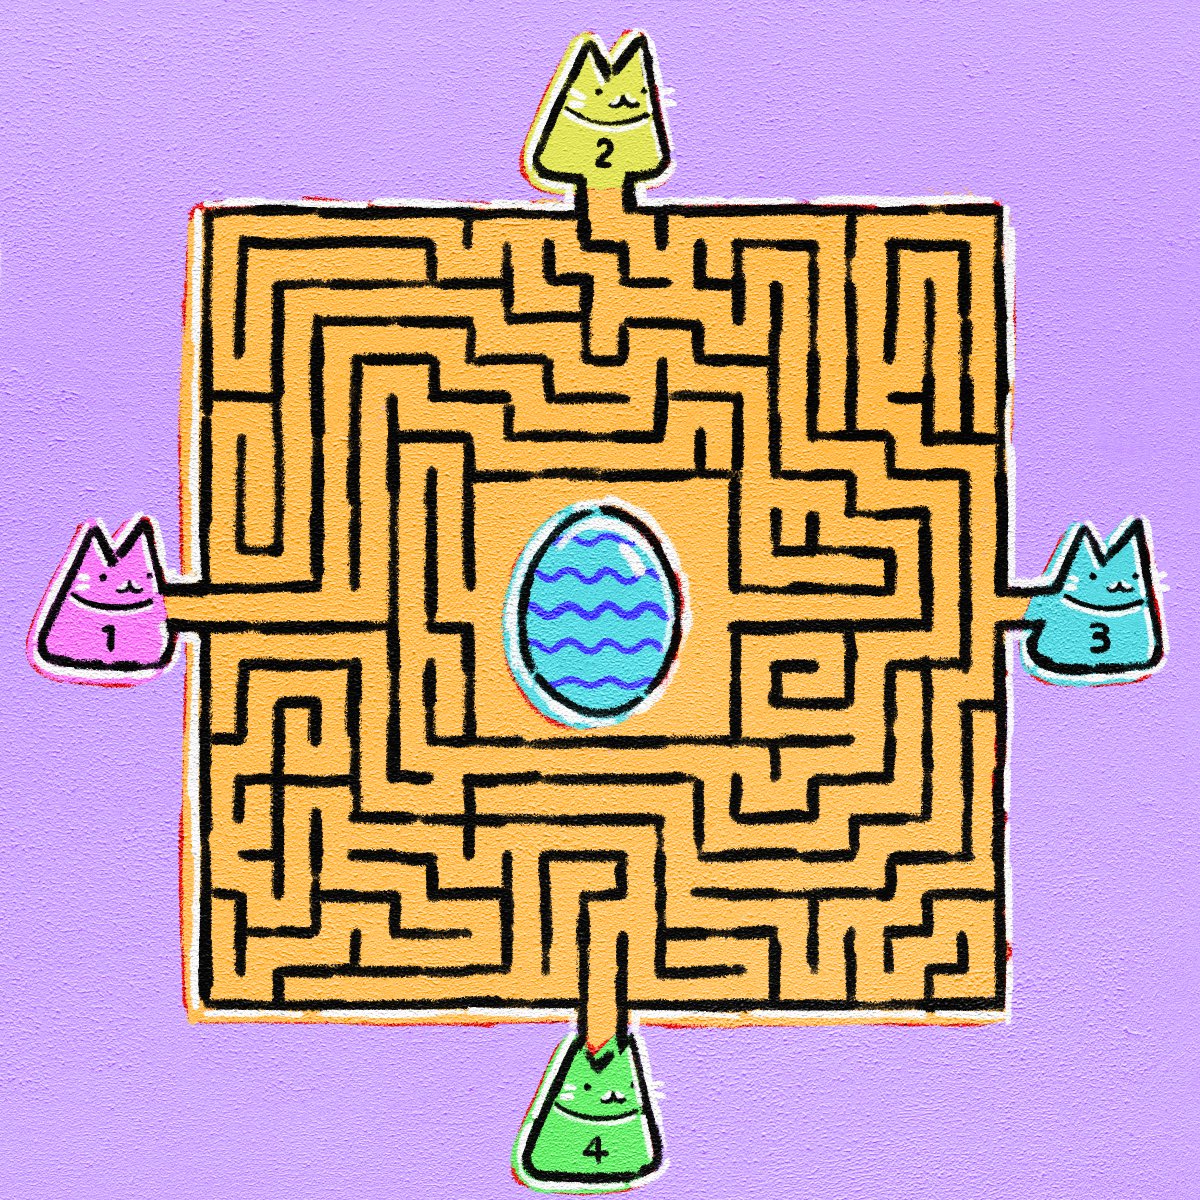 EASTER GIVEAWAY! Guess which cat(s) can get to the Easter egg and you could win $500 worth of ETH and a Pop Art Cat. To enter: Like, RT & follow + comment your answer. Picking a winner in ~48 hours #NFT